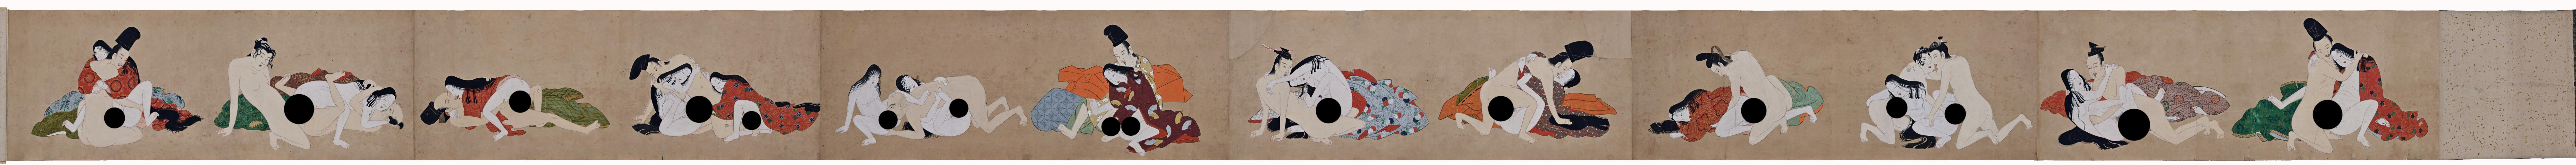 Shunga 

Anonymous, Kano school

17th century

Hand-scroll of 12 images

Ink, pigment and gofun on paper

This is a notable early Kano school hand-scroll of lavishly hand-painted Shunga. In each scene, the individual couples are isolated